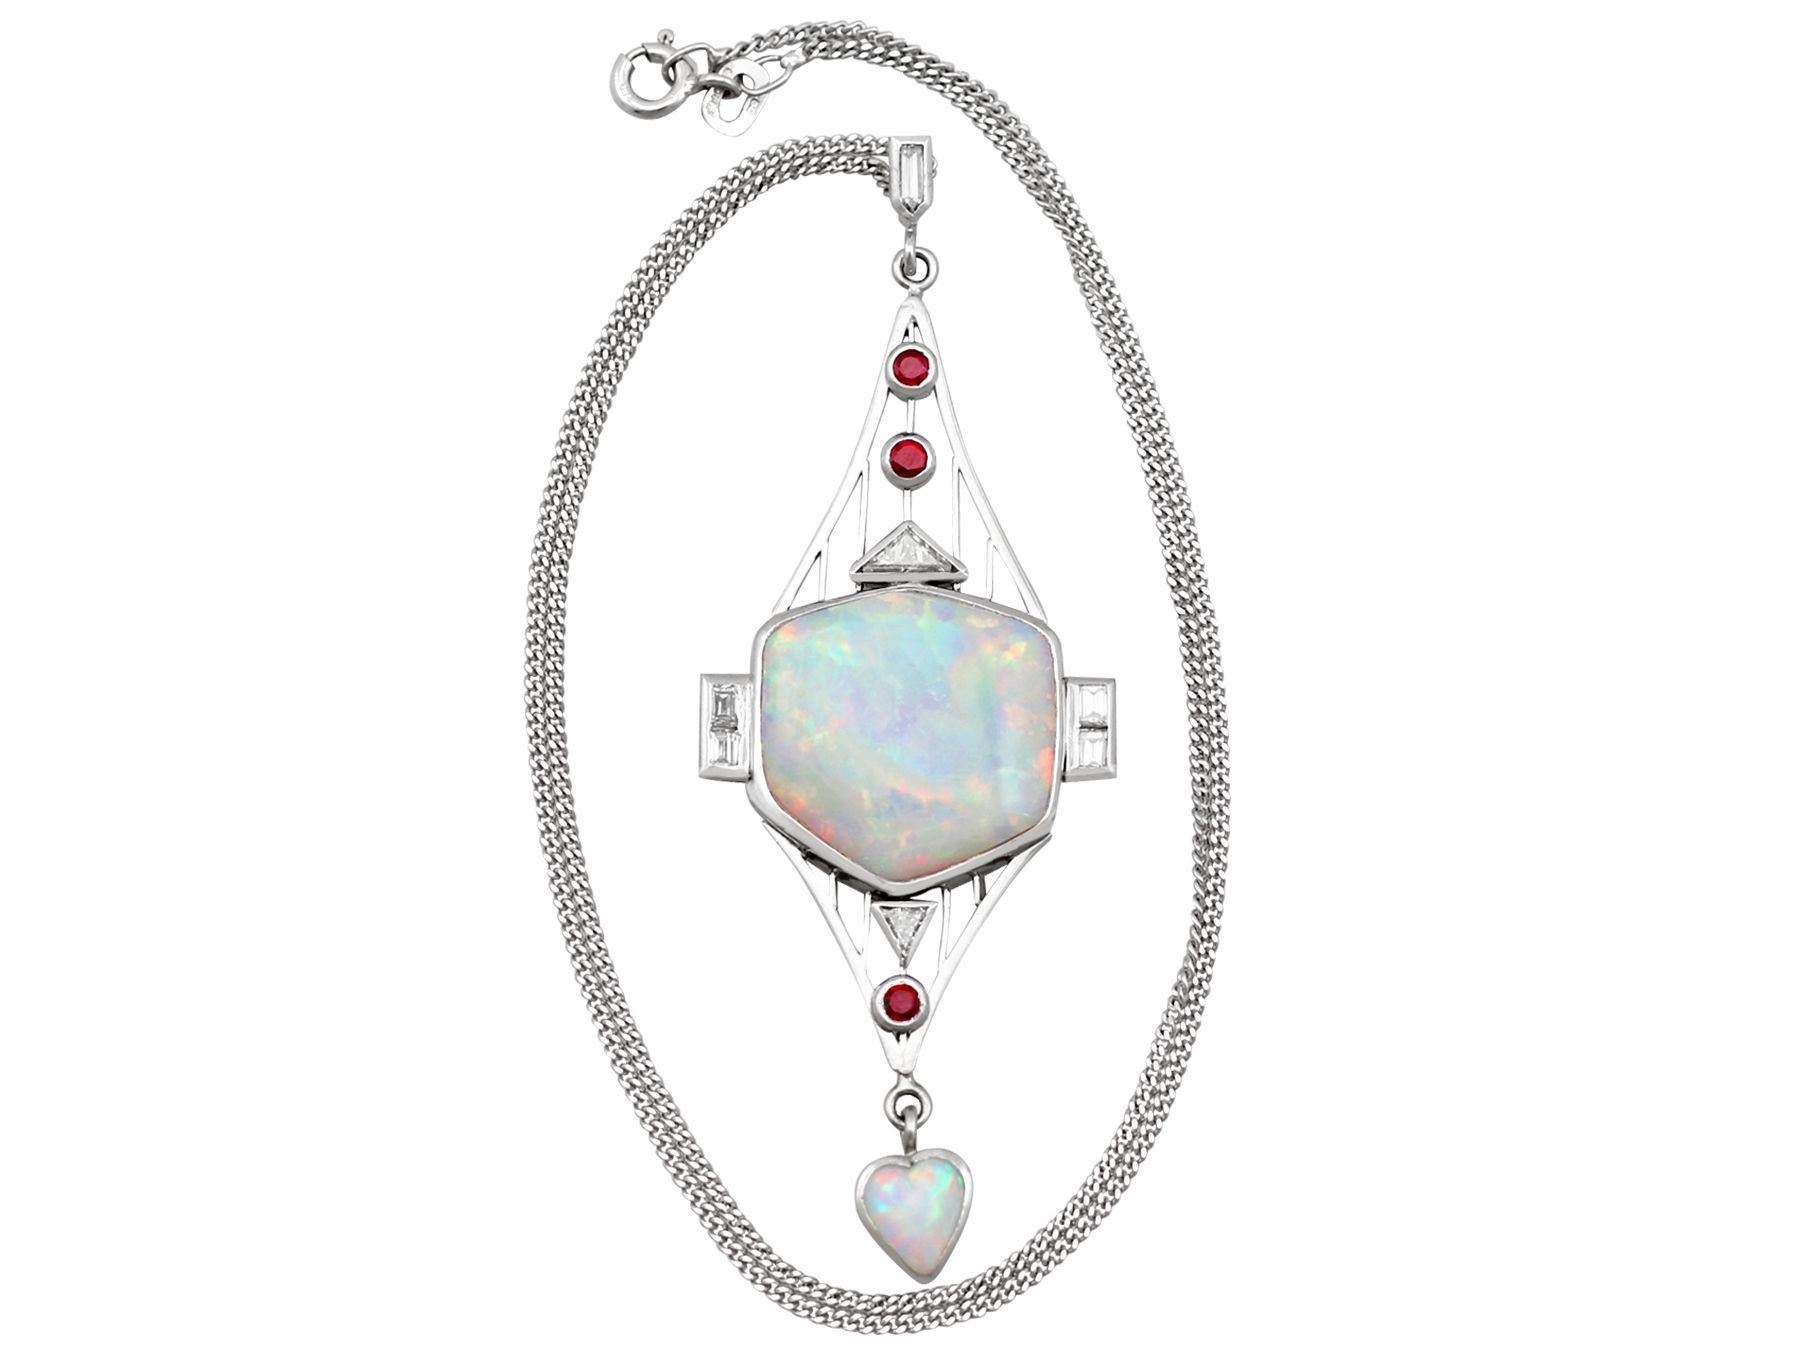 A stunning, fine and impressive opal, 0.85 carat diamond and 0.15 carat natural ruby, Art Deco style platinum pendant; part of our diverse gemstone estate jewelry collections.

This fine large opal pendant has been crafted in platinum.

The pendant